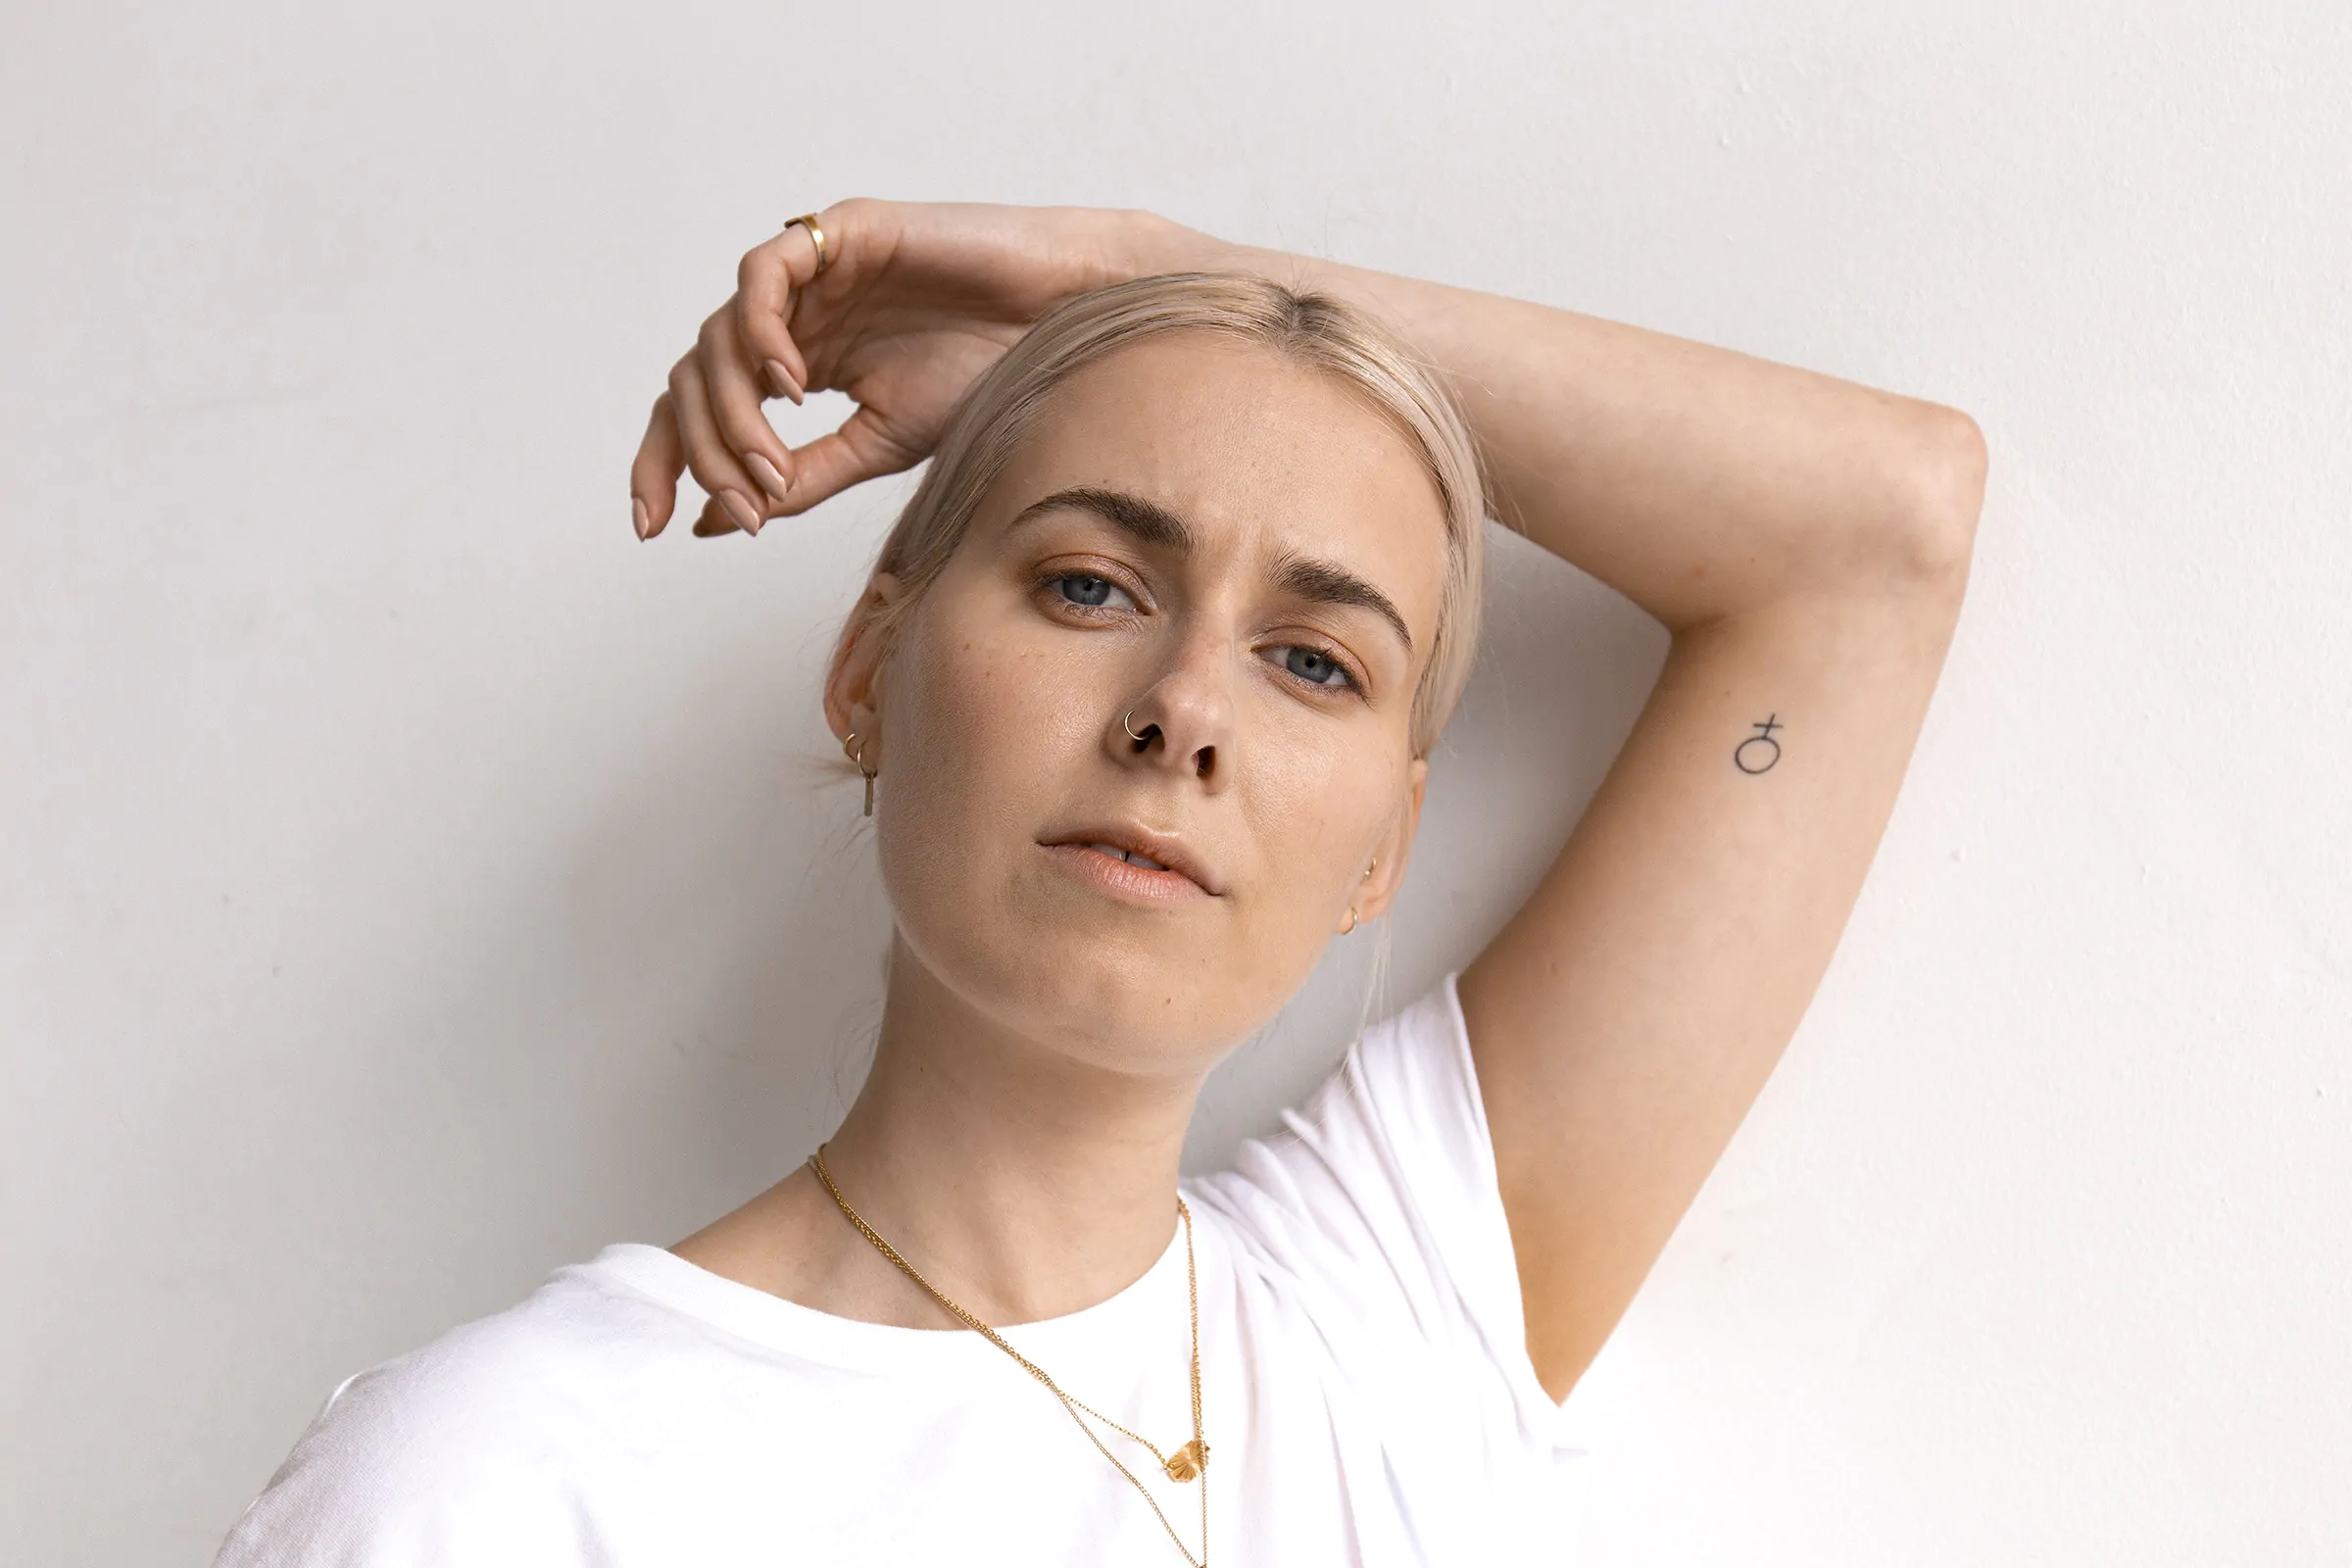 INTERVIEW: Iceland’s Pop Songstress Áslaug Speaks On Her Self-Titled Debut EP